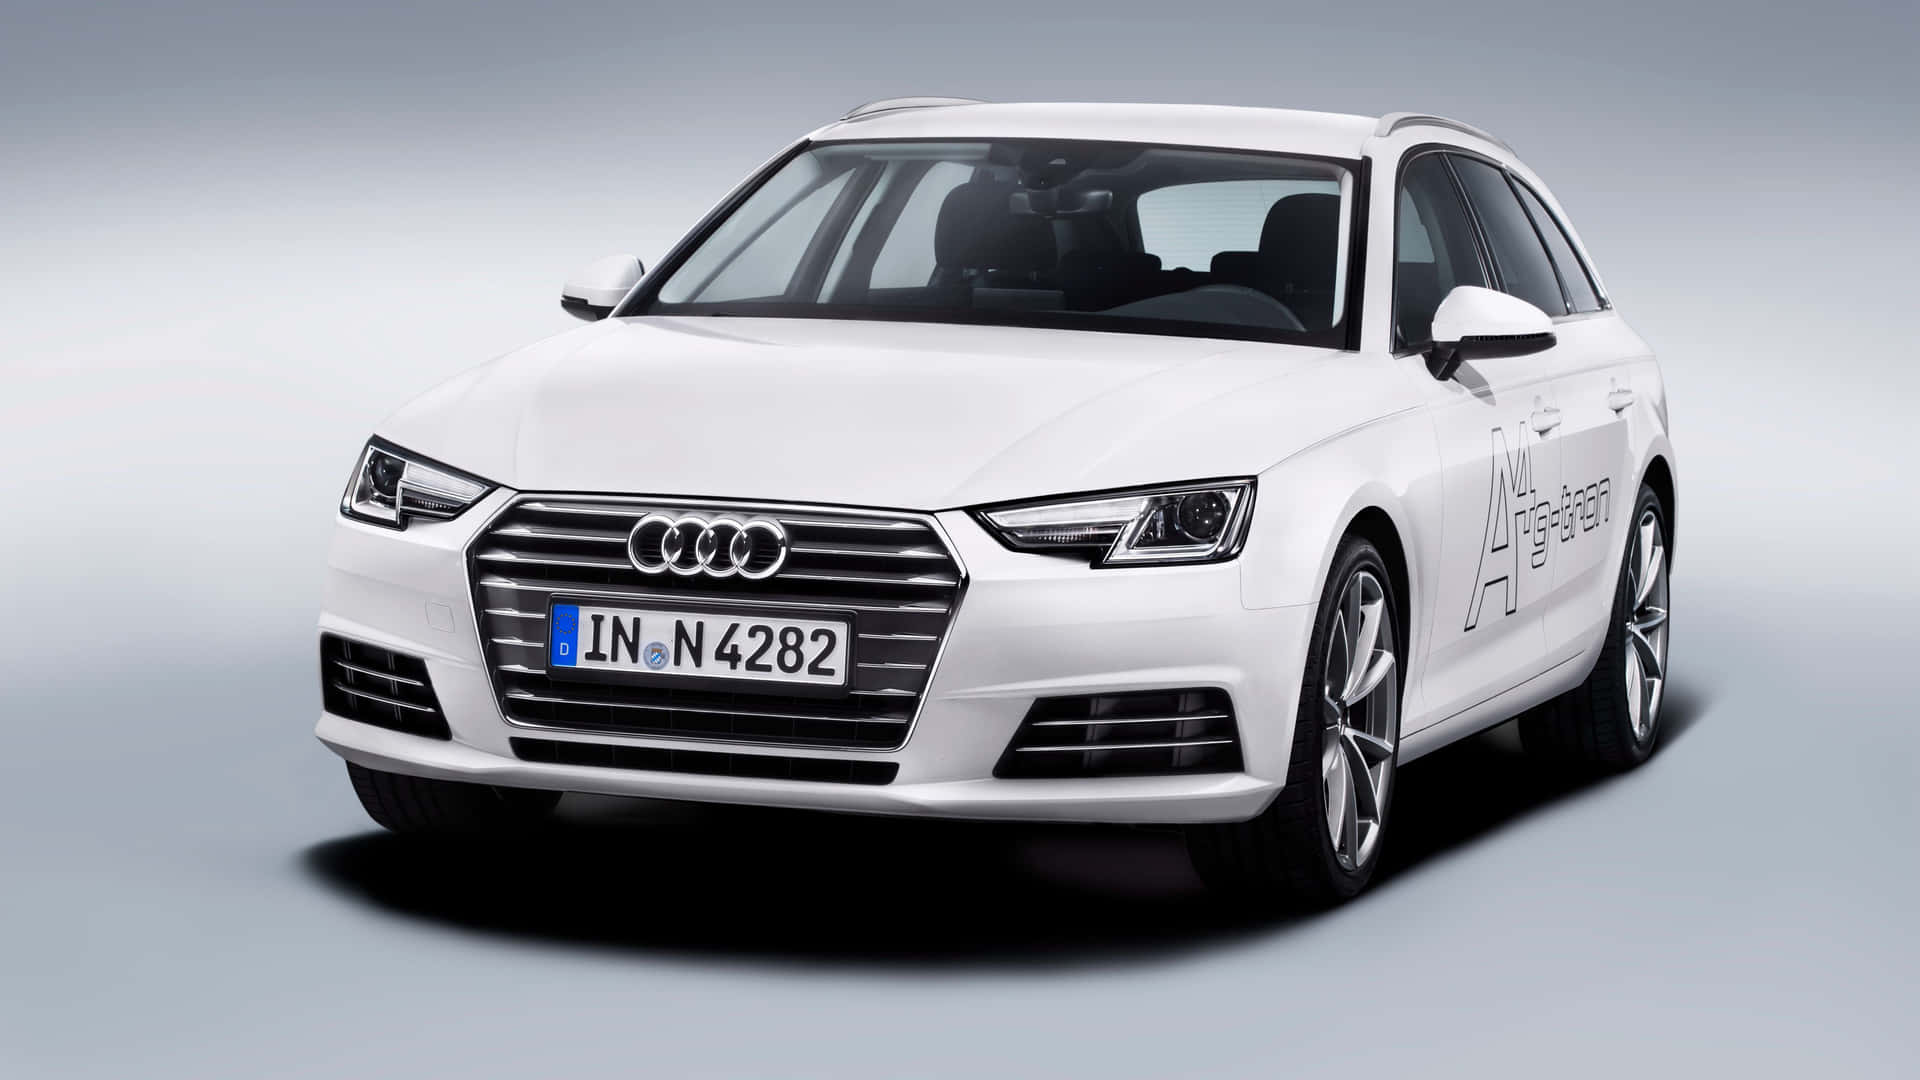 Sleek Audi A4 showcasing its elegant design and sophistication on the city streets. Wallpaper